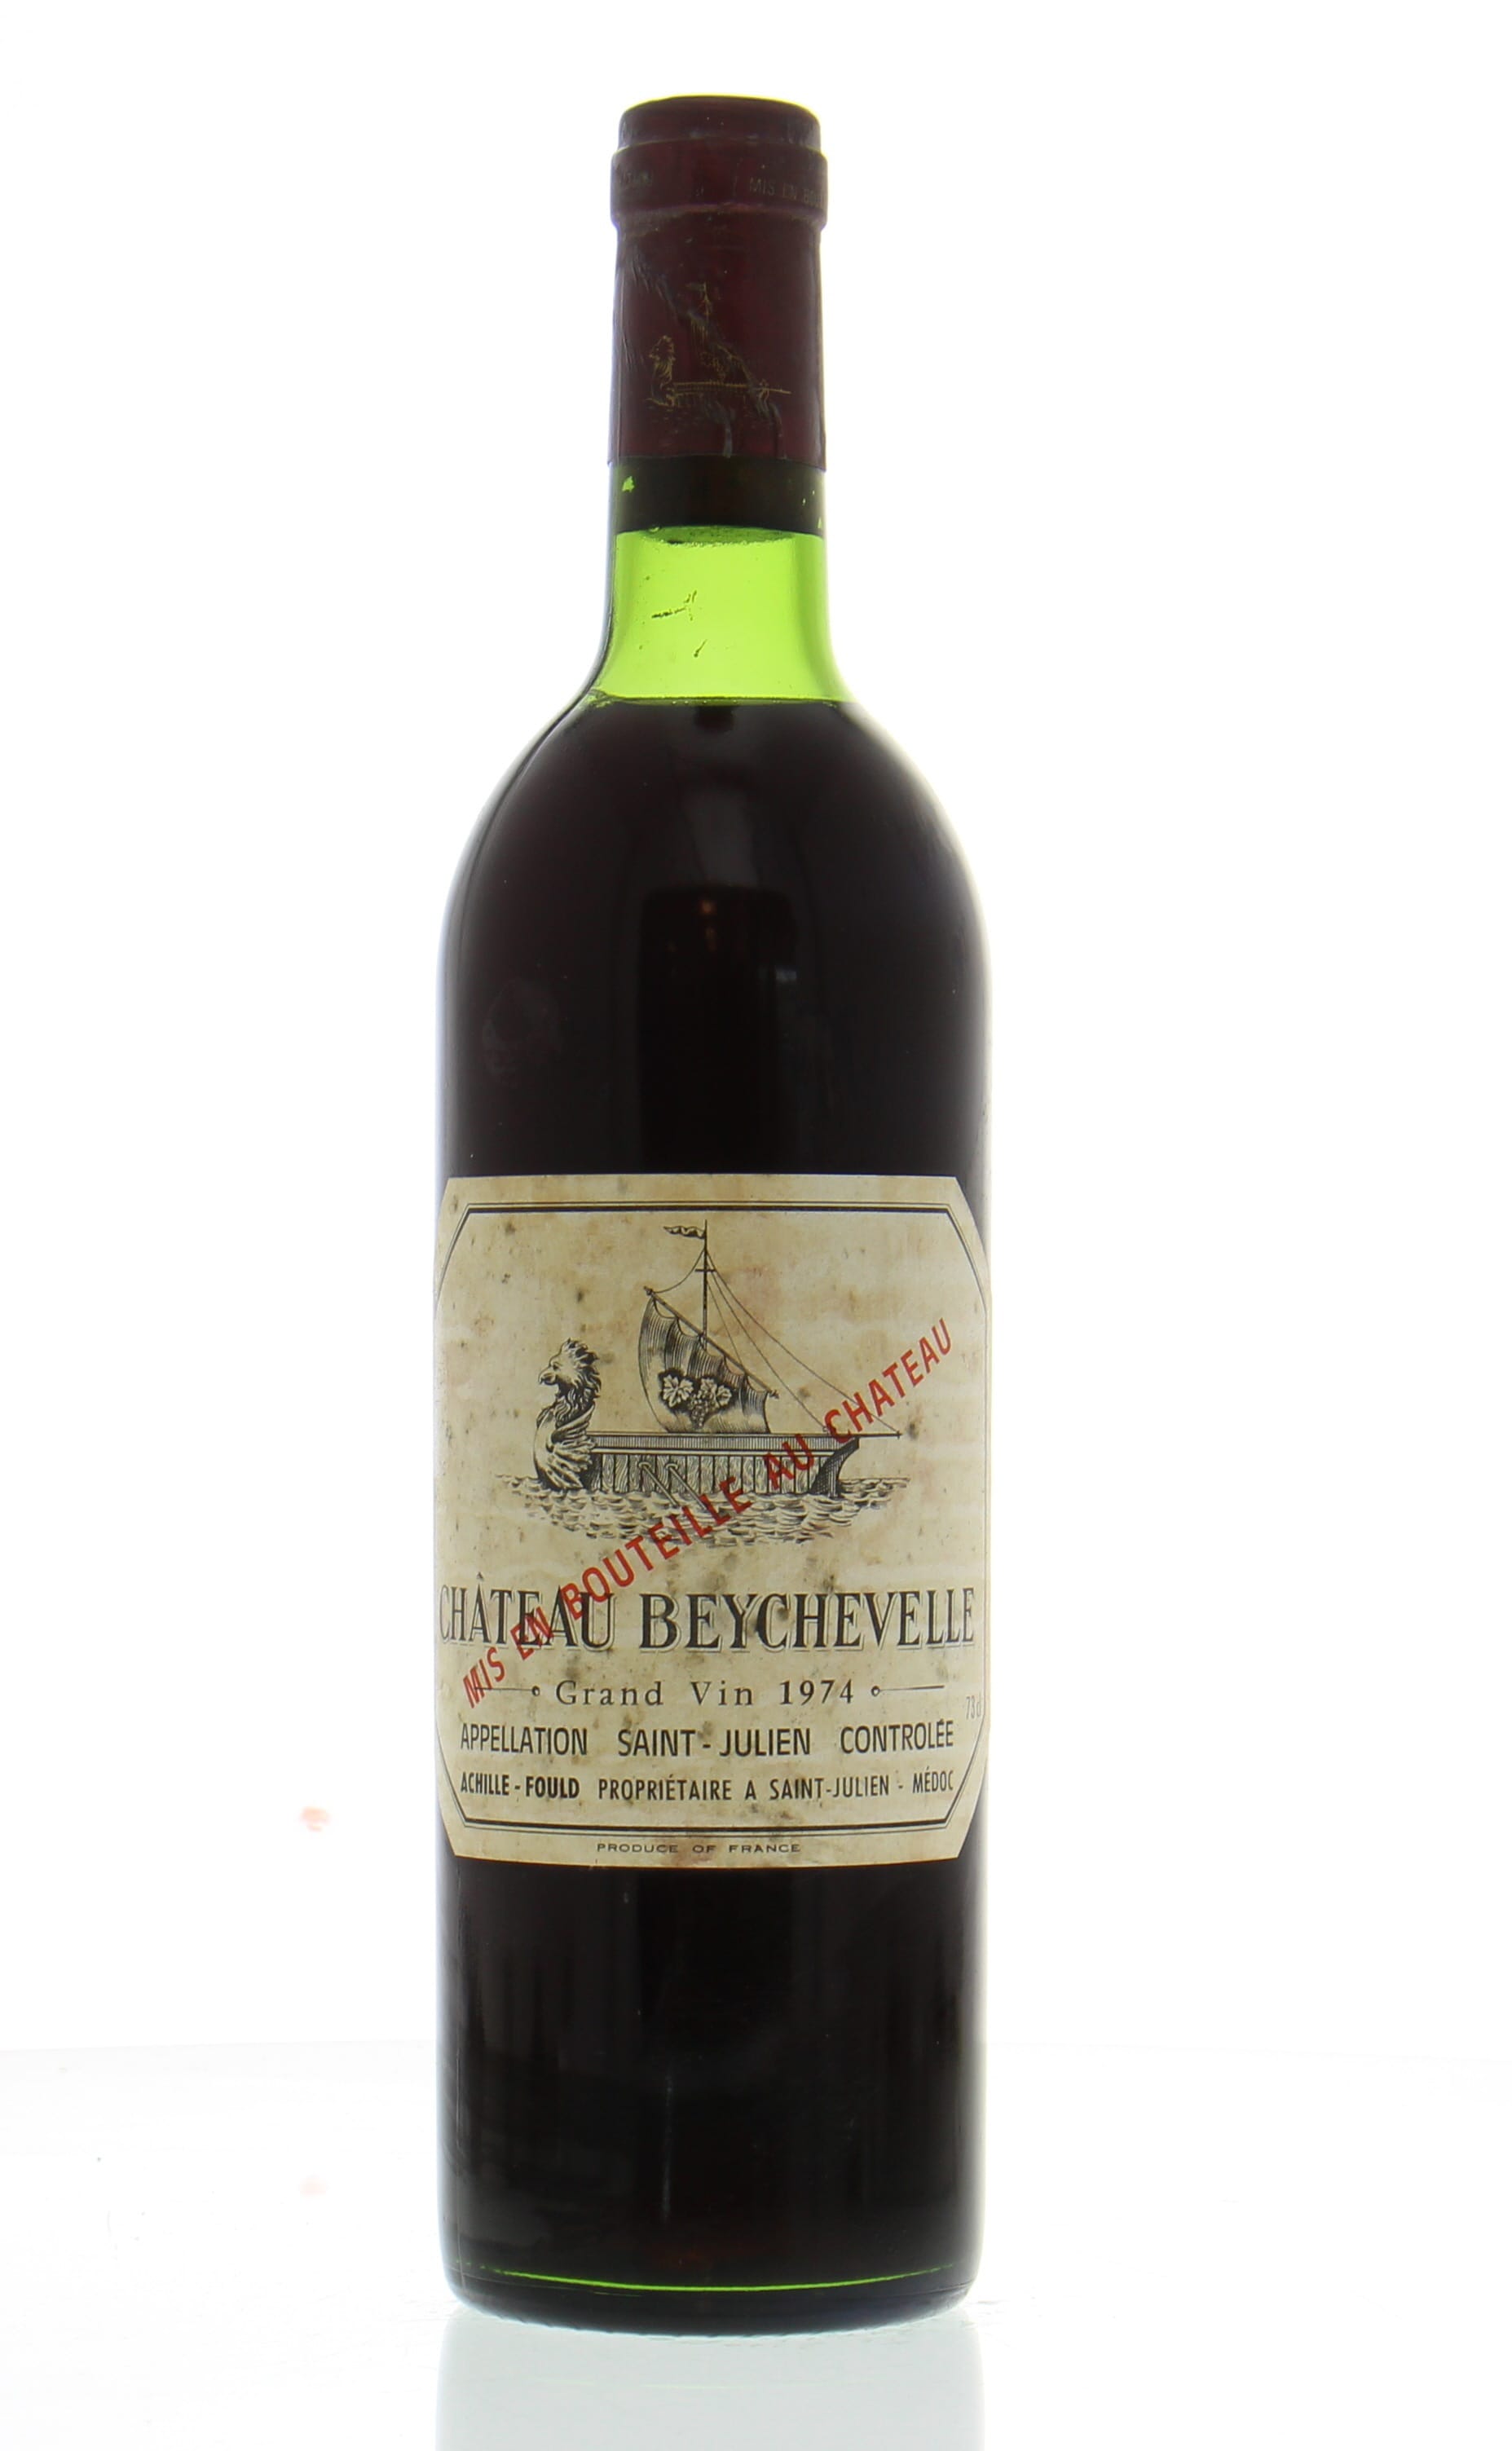 Chateau Beychevelle - Chateau Beychevelle 1974 Top Shoulder